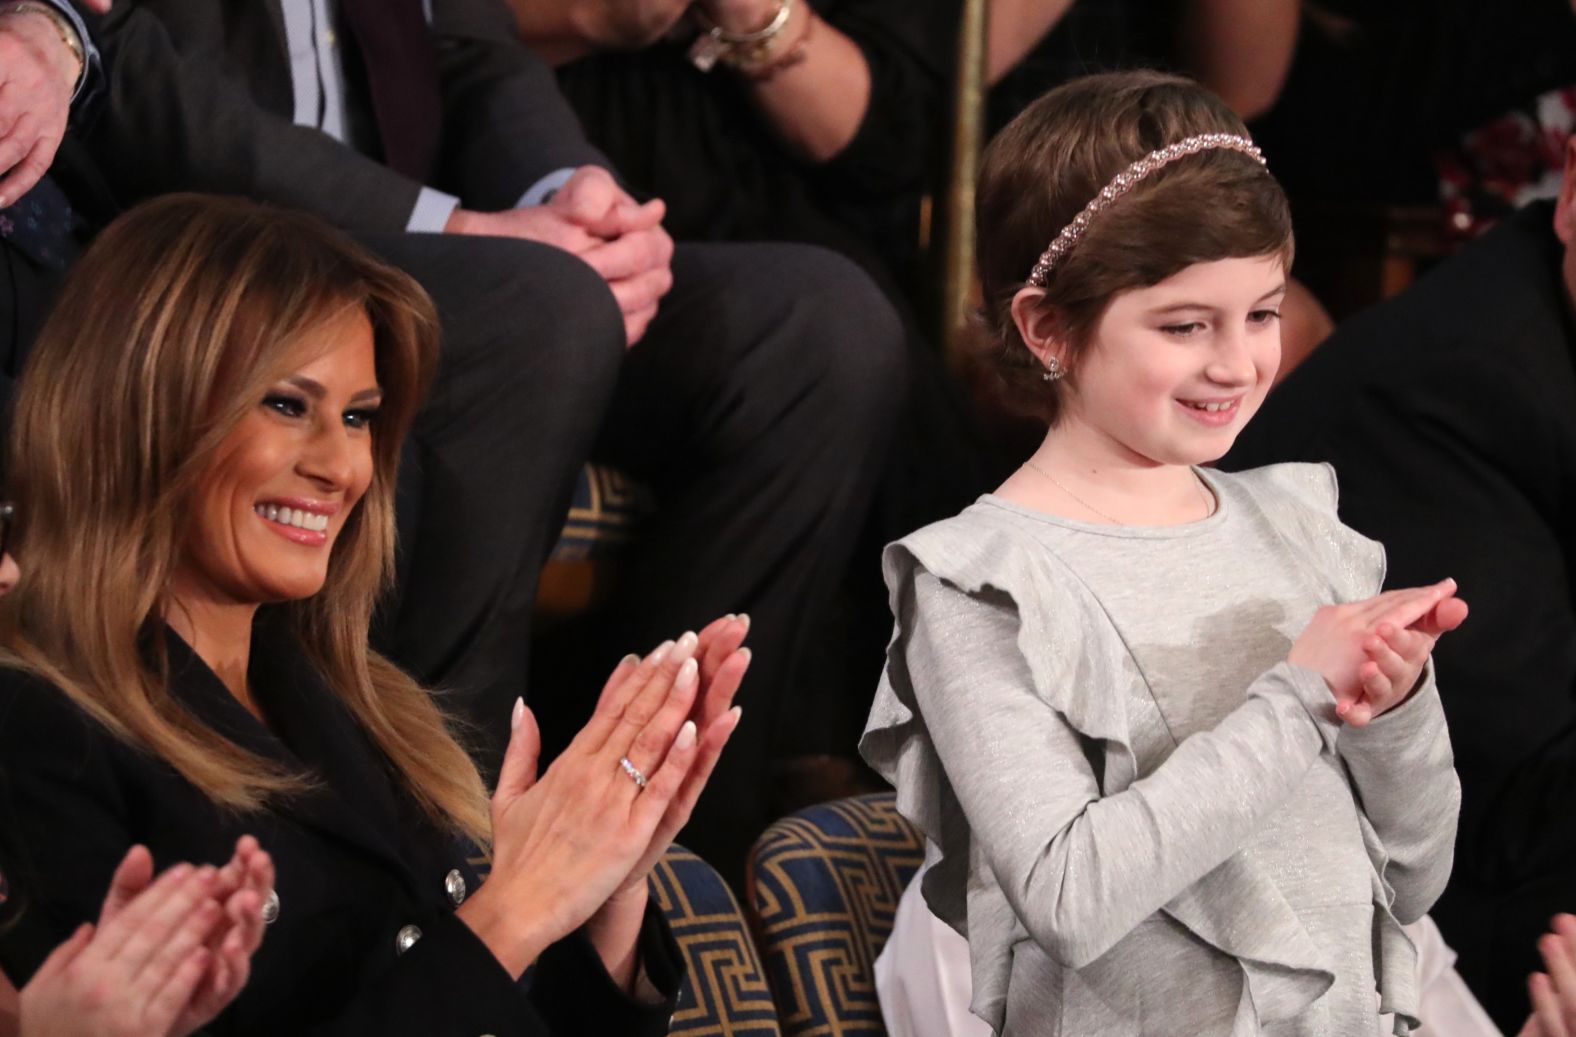 First lady Melania Trump applauds with 10-year-old cancer survivor Grace Eline as <a href="index.php?page=&url=https%3A%2F%2Fwww.cnn.com%2Fpolitics%2Flive-news%2Fstate-of-the-union-2019%2Fh_44ad15175e206bbae81d5b6bb9d47ac2" target="_blank">Trump mentions Grace</a> during his speech. Grace was 9 when she was diagnosed with germinoma, a type of brain cancer. "At the same time, she rallied her community and raised more than $40,000 for the fight against cancer," Trump said. The White House said Grace recently finished chemotherapy and today shows no evidence of the disease.